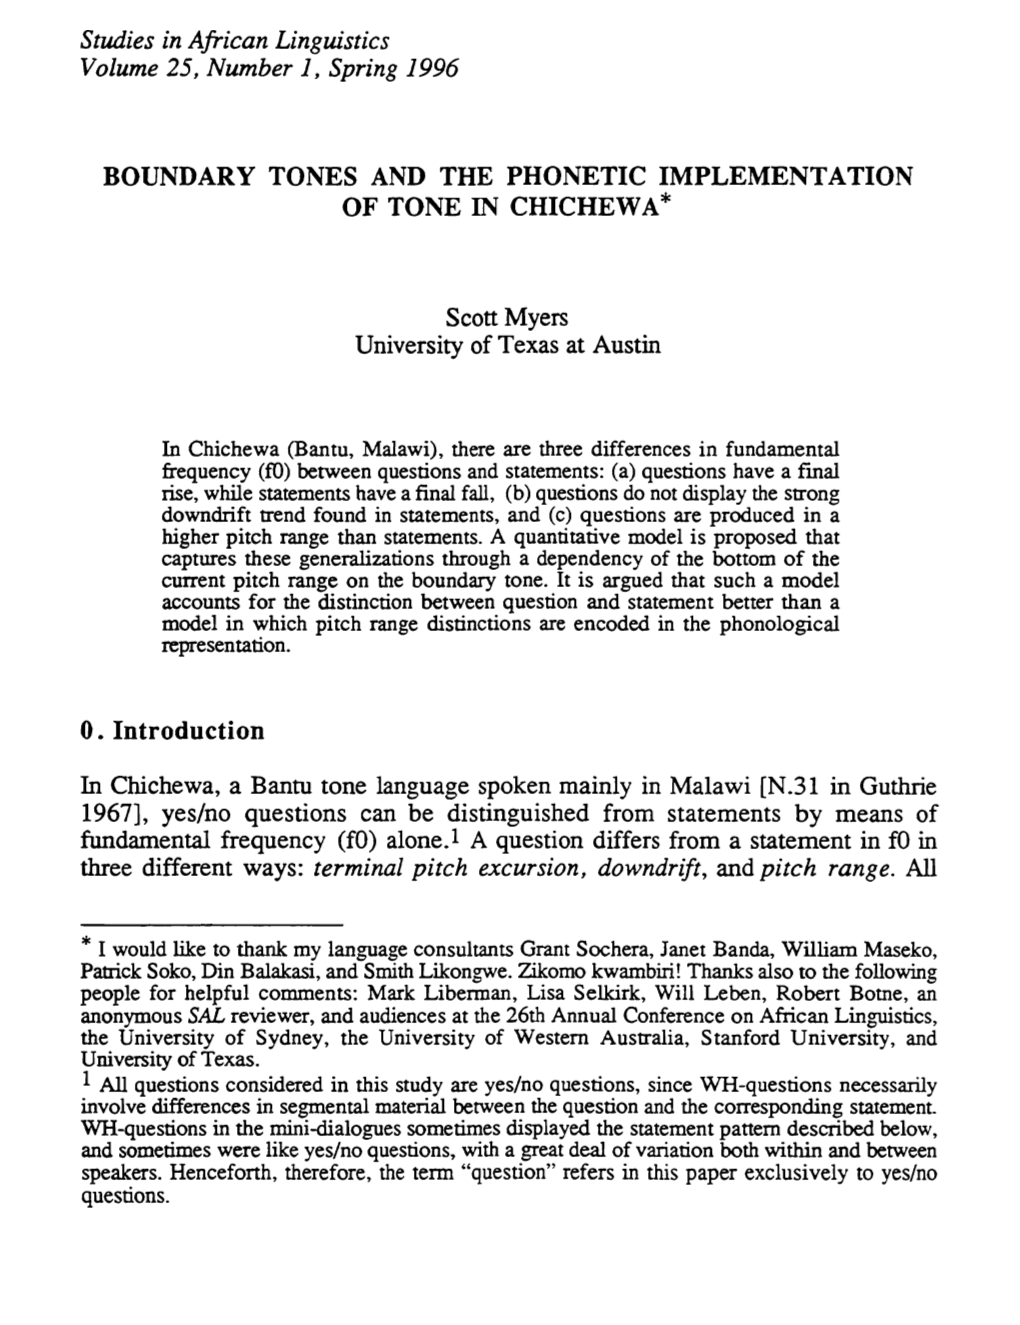 Myers Scott. (1996). Boundary Tones and the Phonetic Implementation of Tone in Chichewa